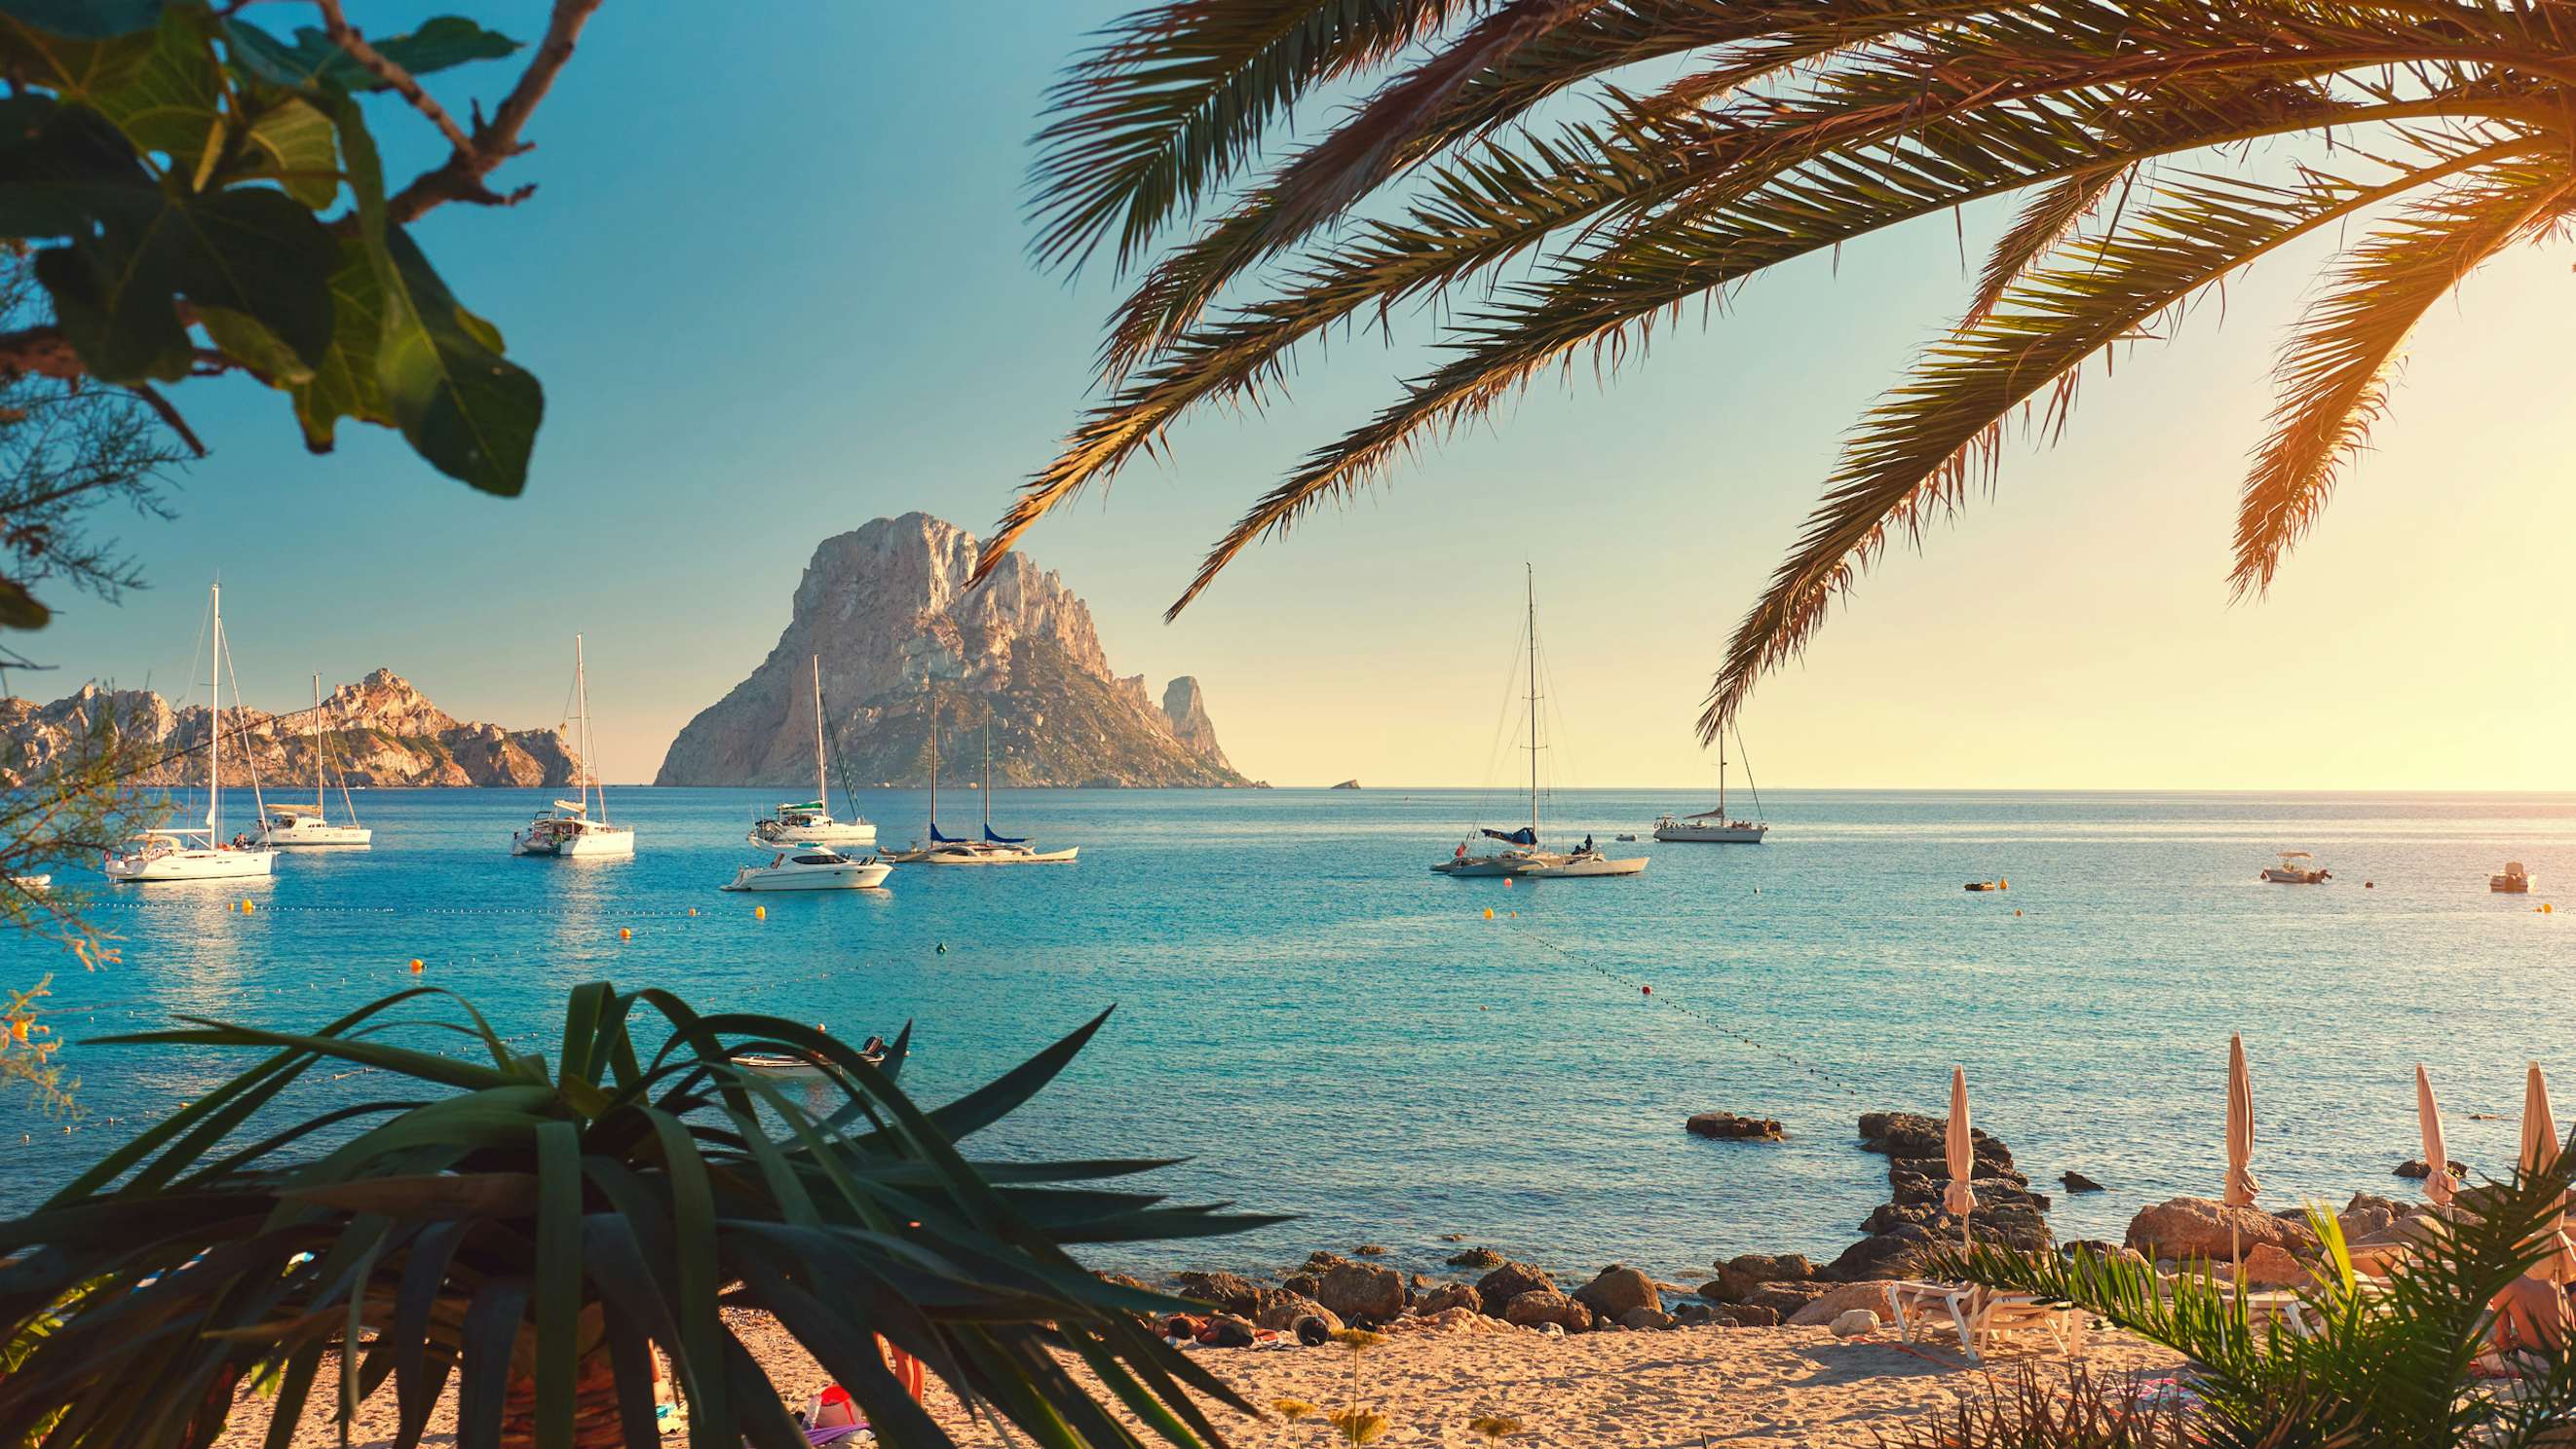 Palm fronds frame a serene view of anchored yachts near the mystical rock of Es Vedrà, off the coast of Ibiza.